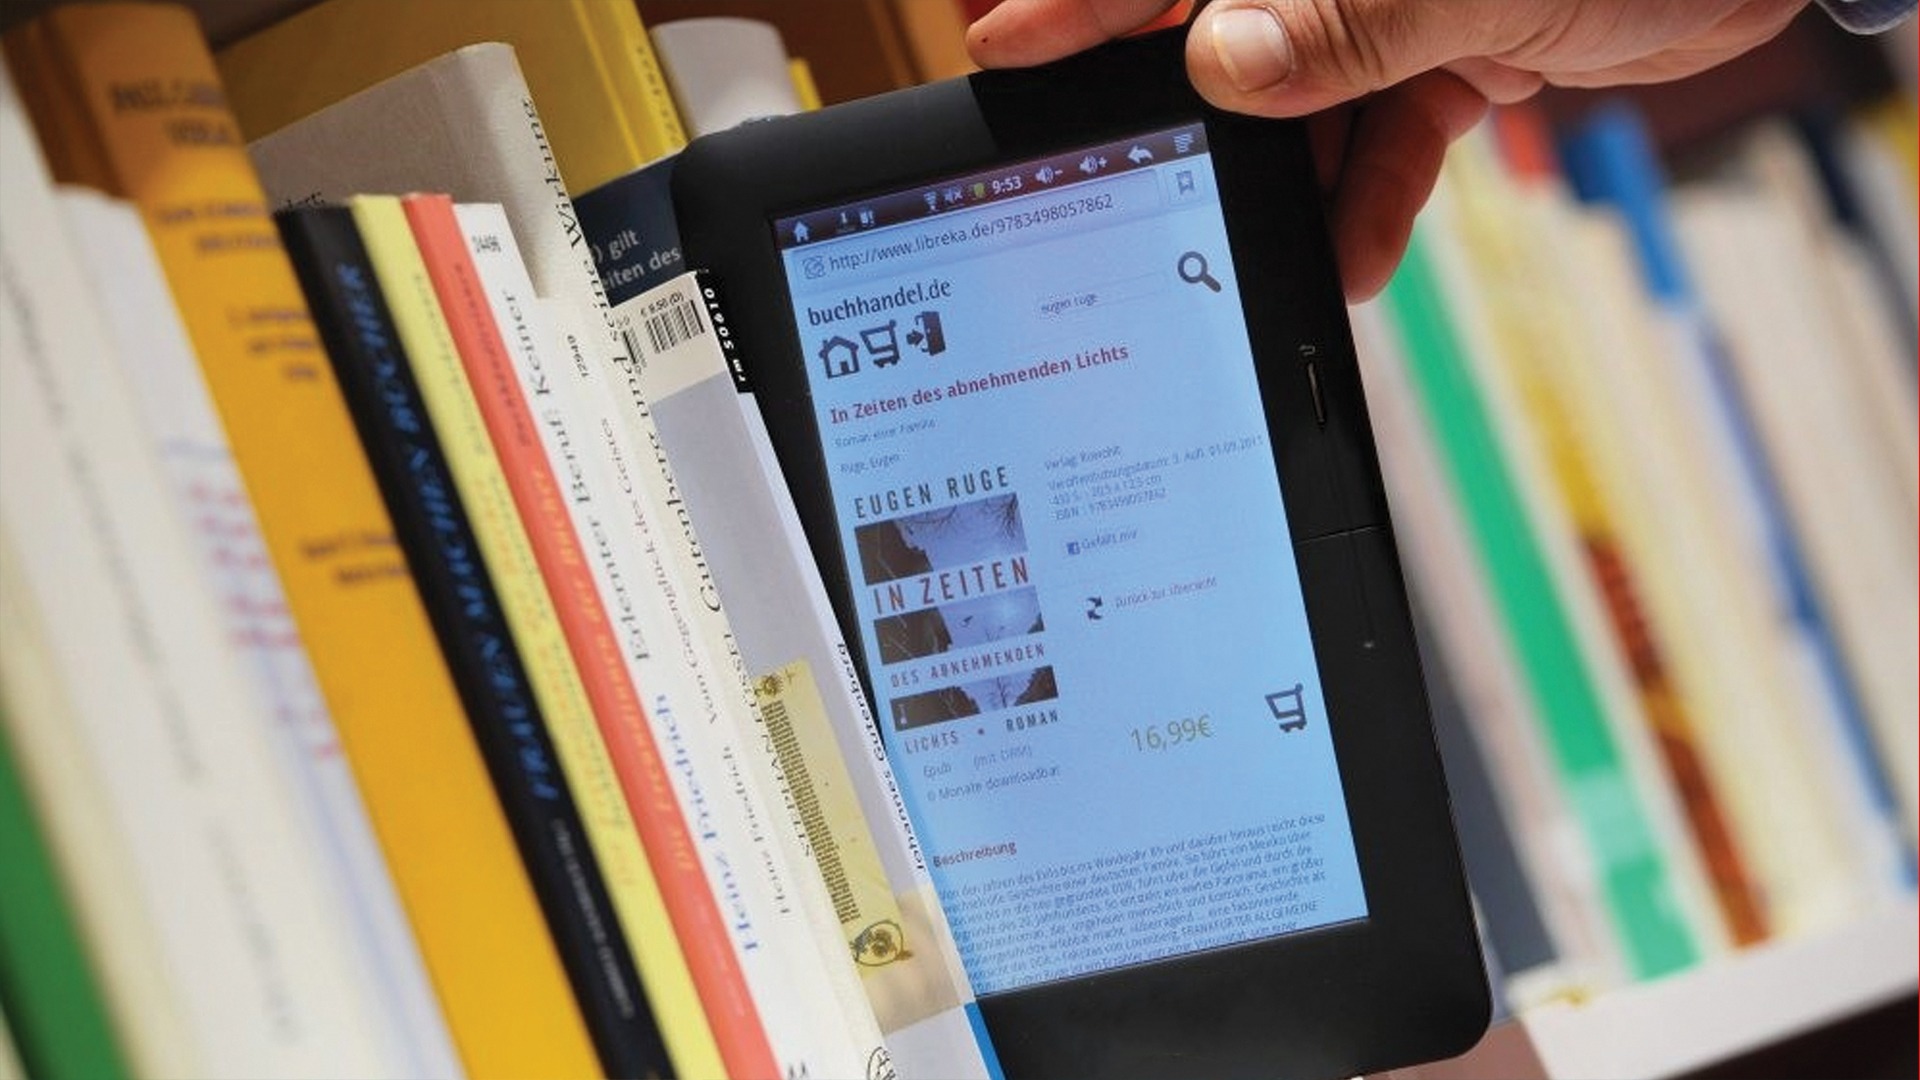 Is technology changing the way we read?